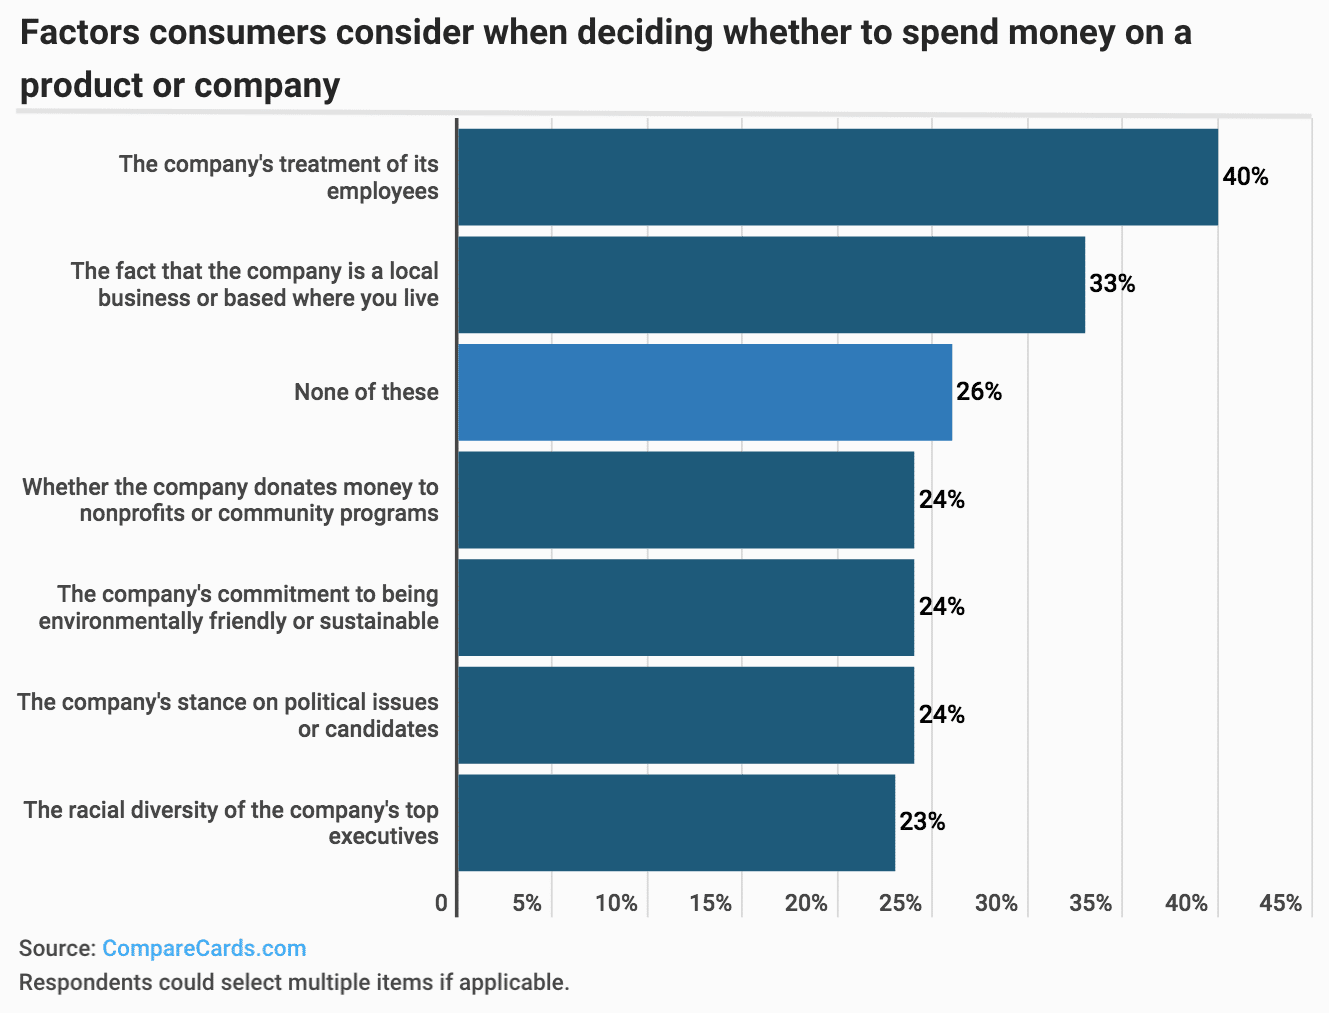 In wake of pandemic and politics, nearly 4 in 10 consumers currently boycotting a company